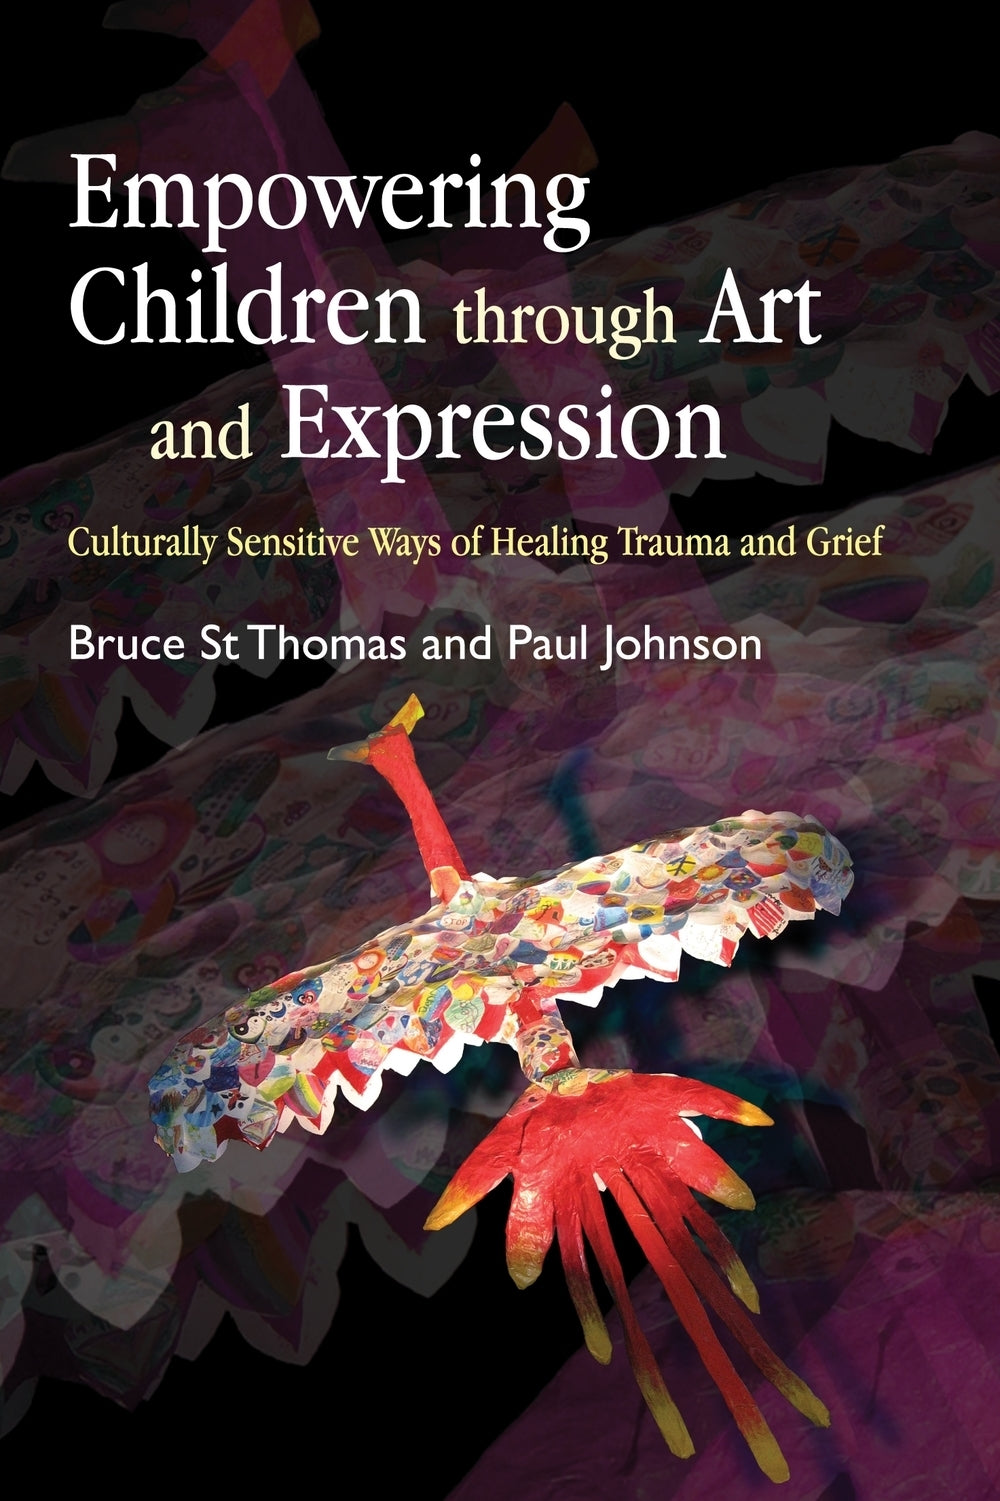 Empowering Children through Art and Expression by Bruce St Thomas, Paul Johnson